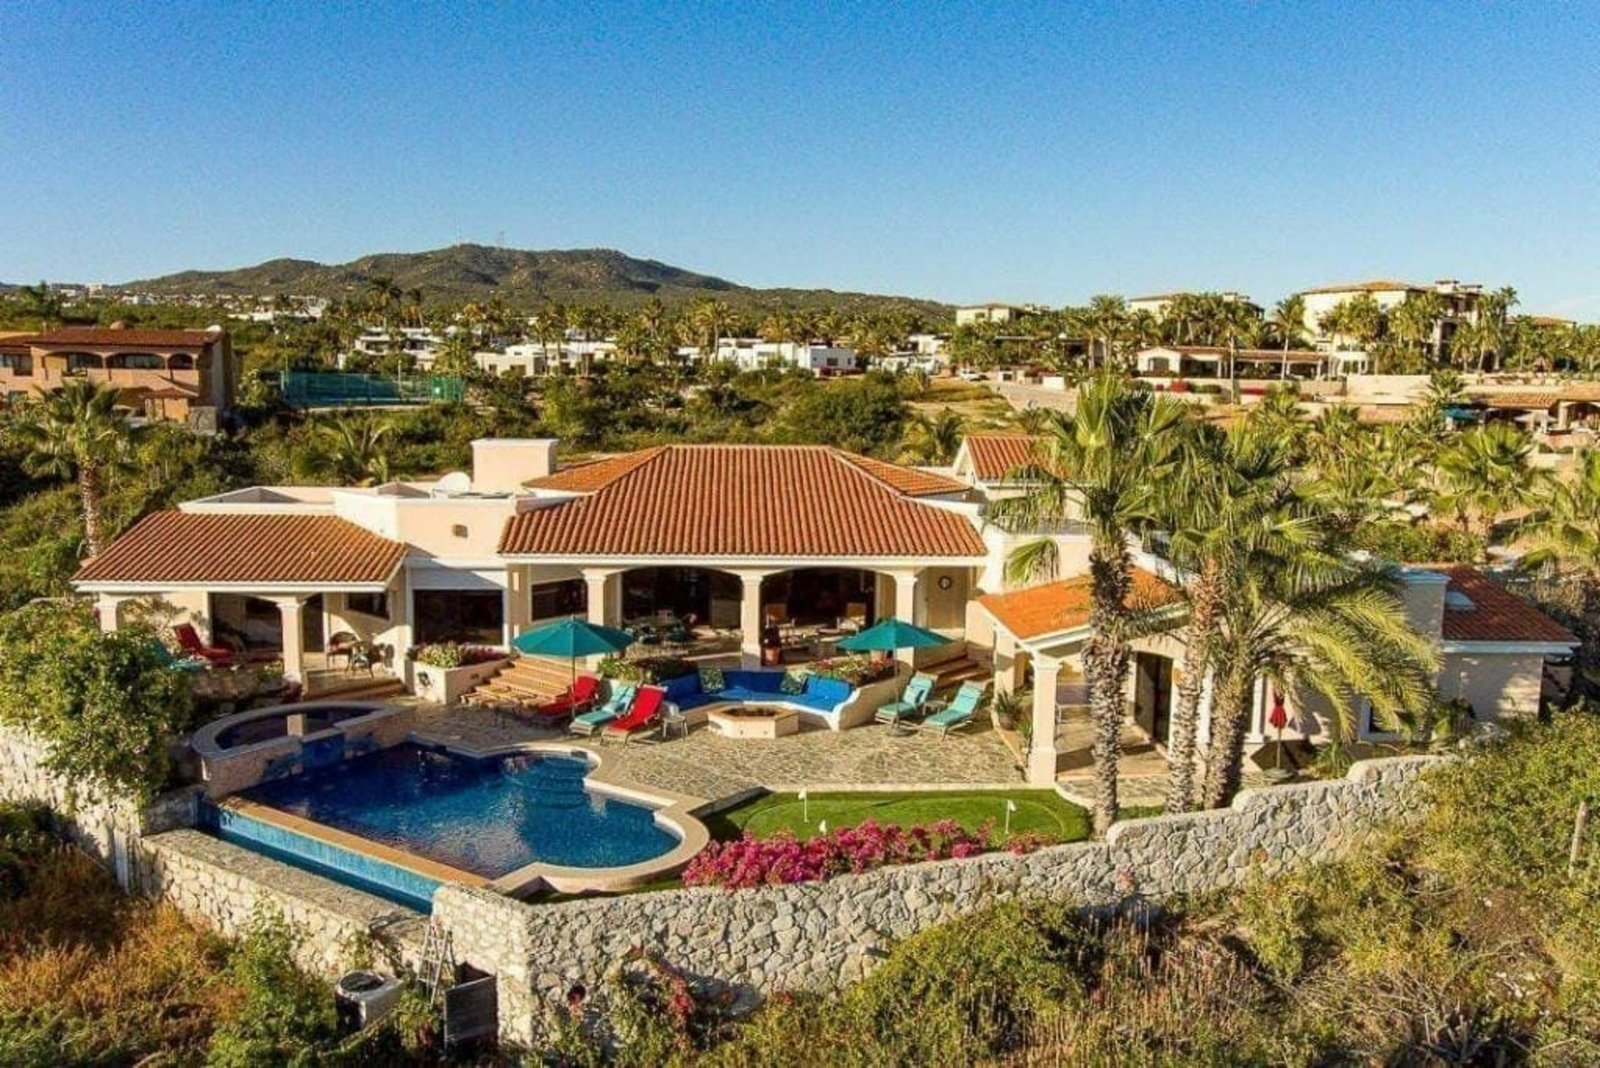 Cabo San Lucas real estate for sale